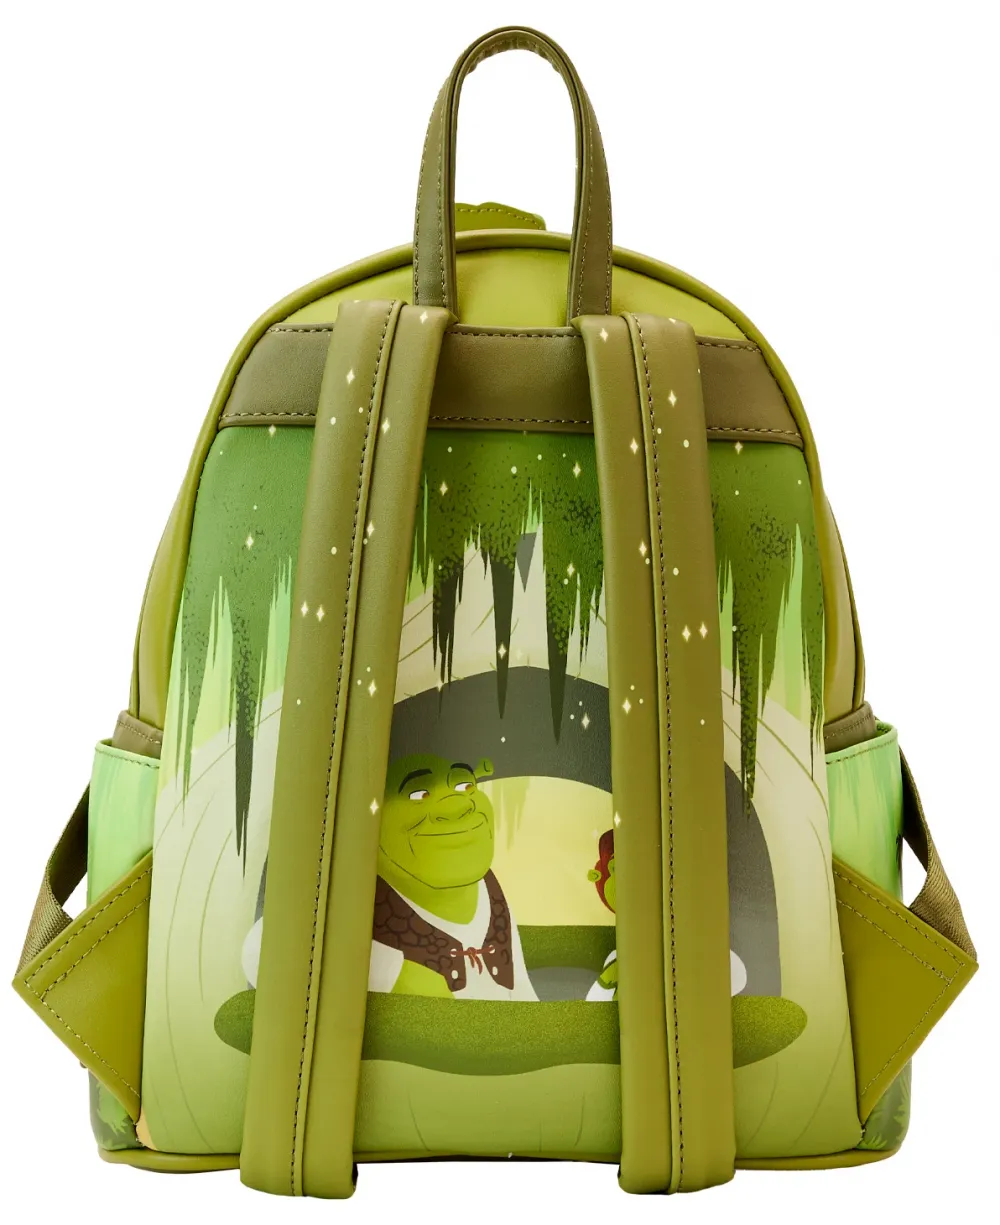 Shrek Happily Ever After Mini Backpack Loungefly